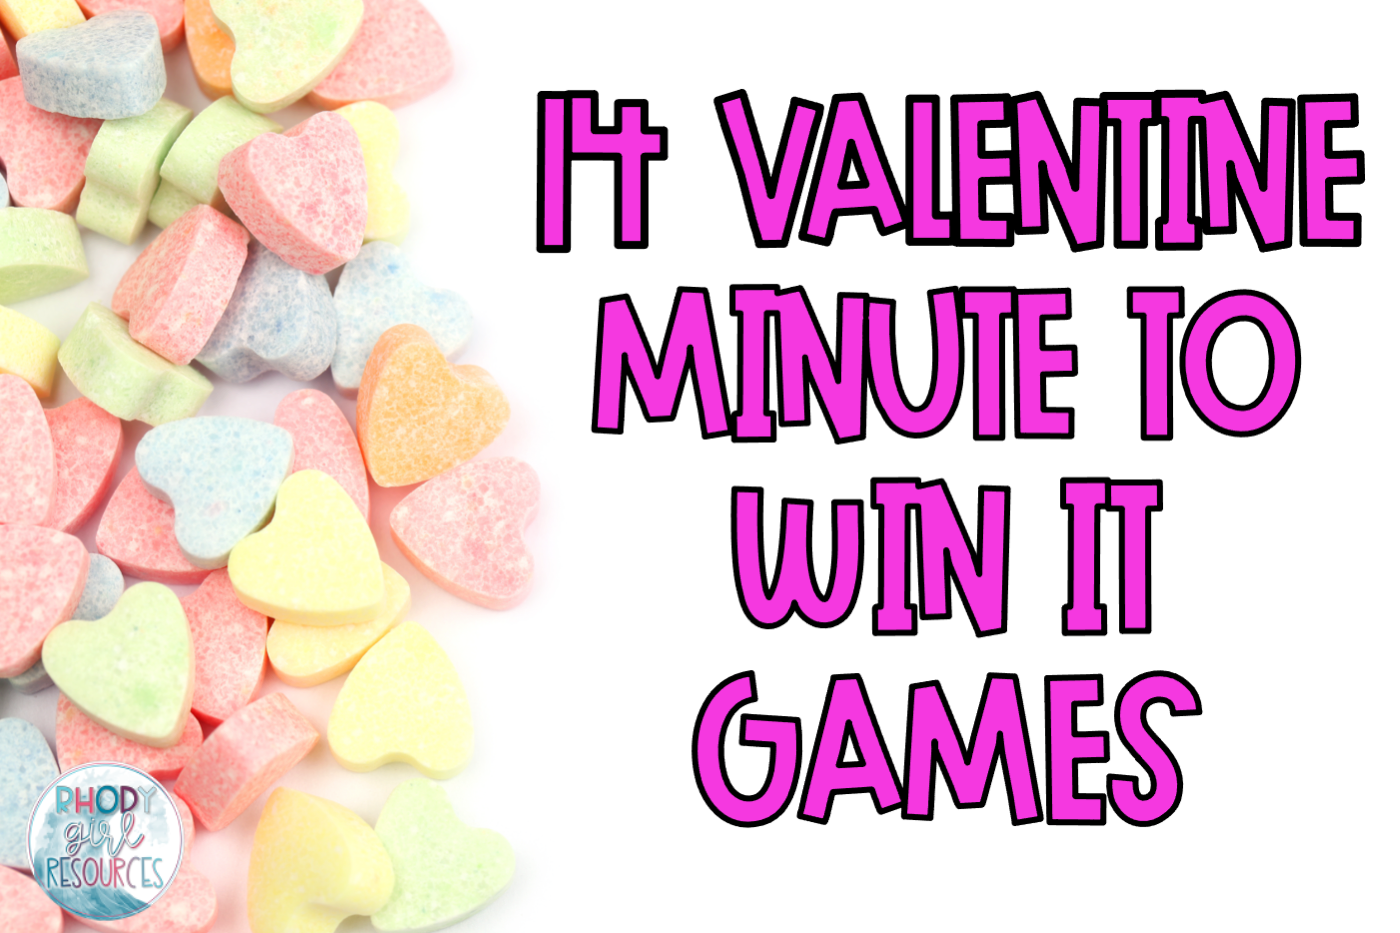 https://rhodygirlresources.com/wp-content/uploads/2021/01/valentine-minute-to-win-it-cover.png